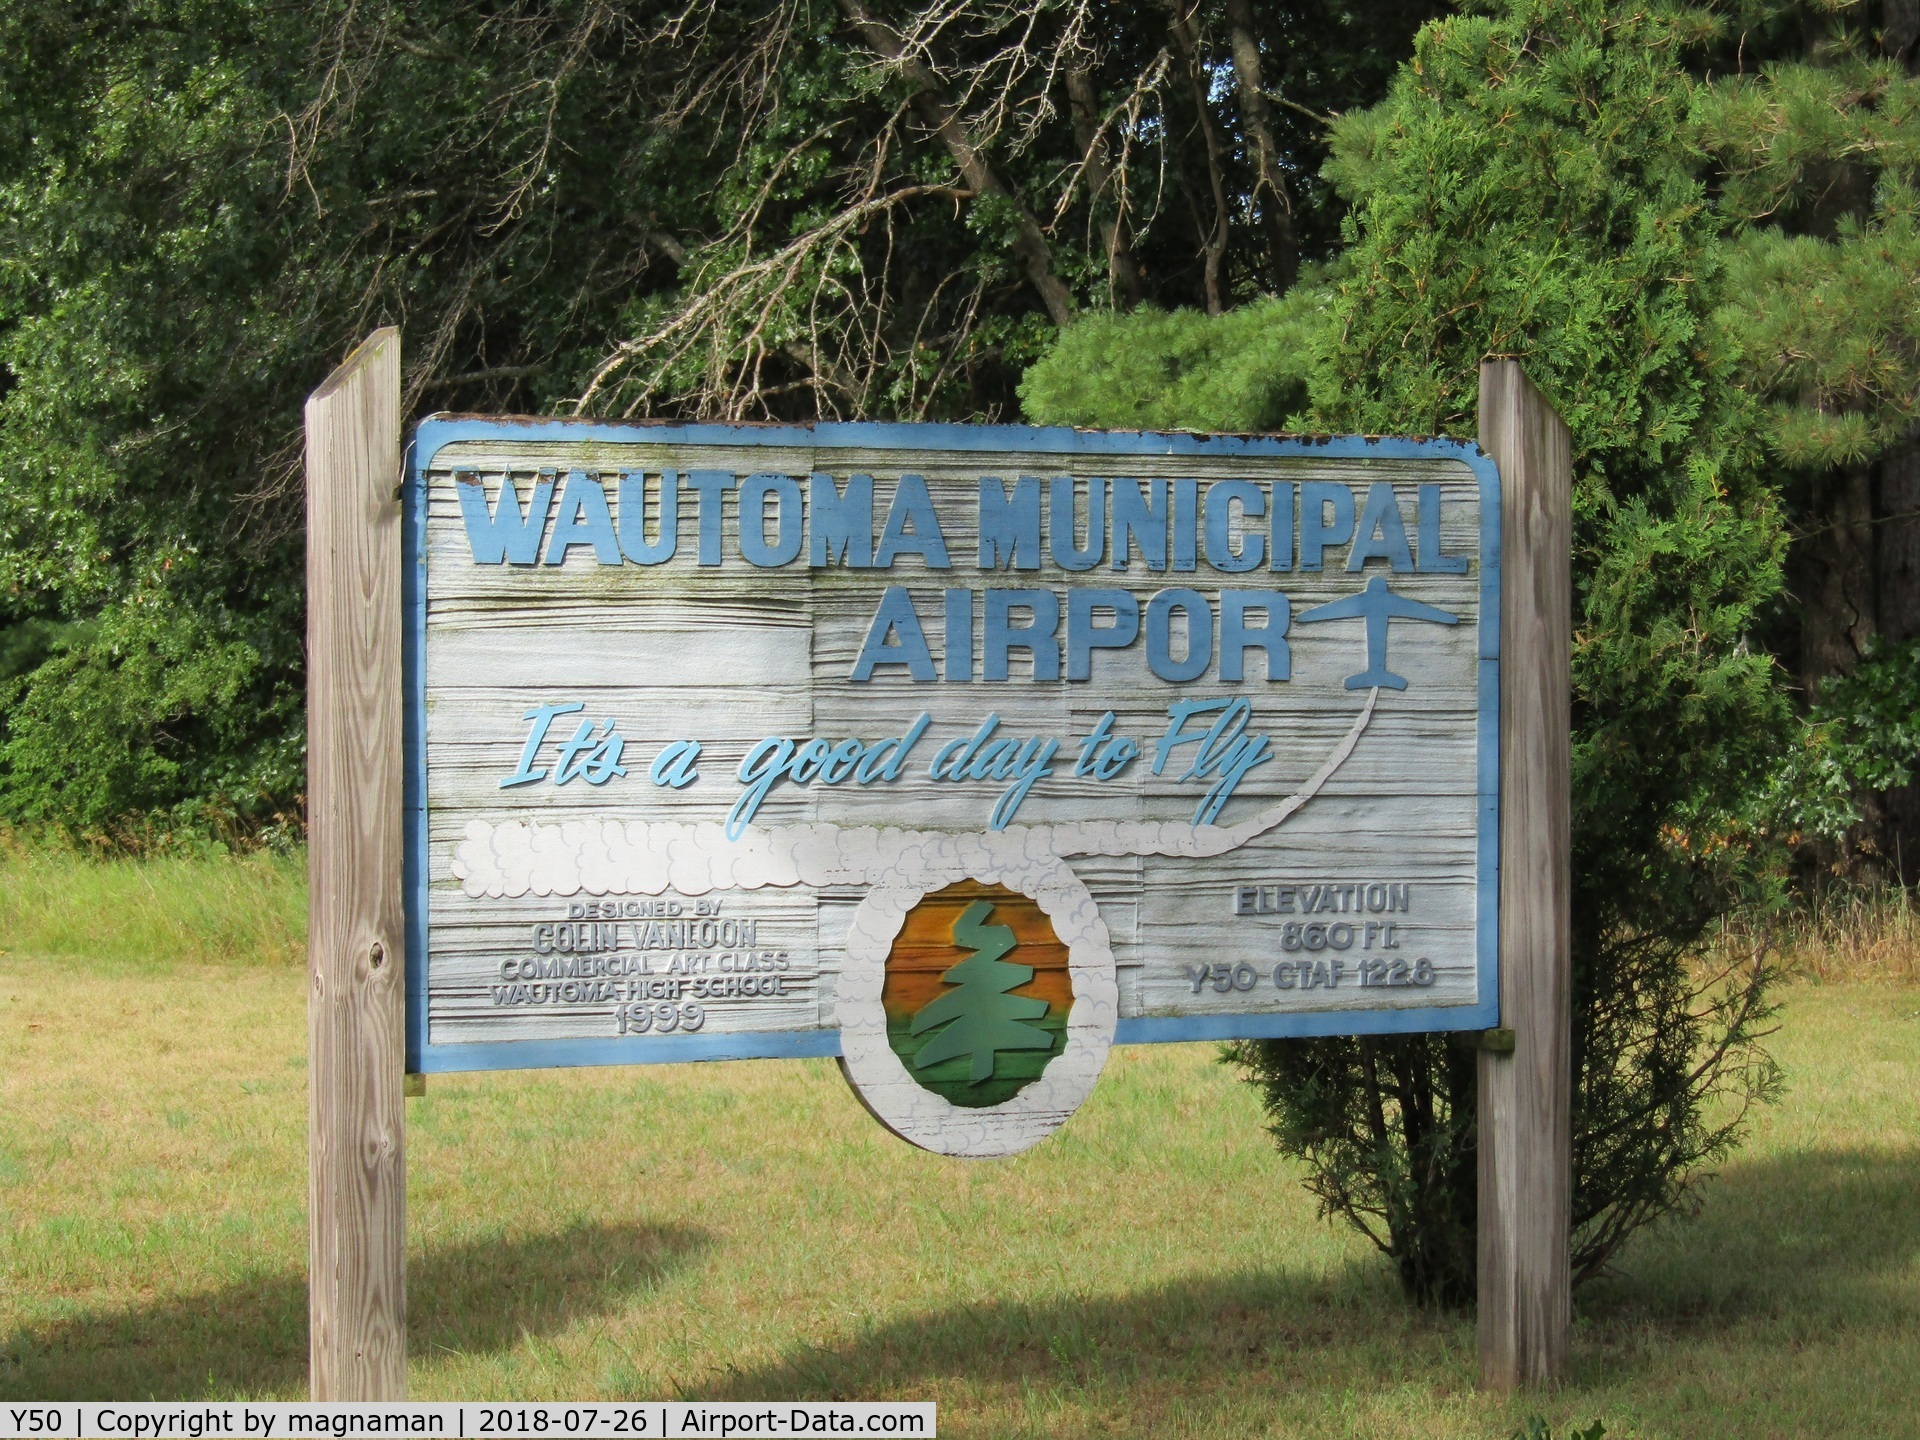 Wautoma Municipal Airport (Y50) - entrance sign to carp park and club house